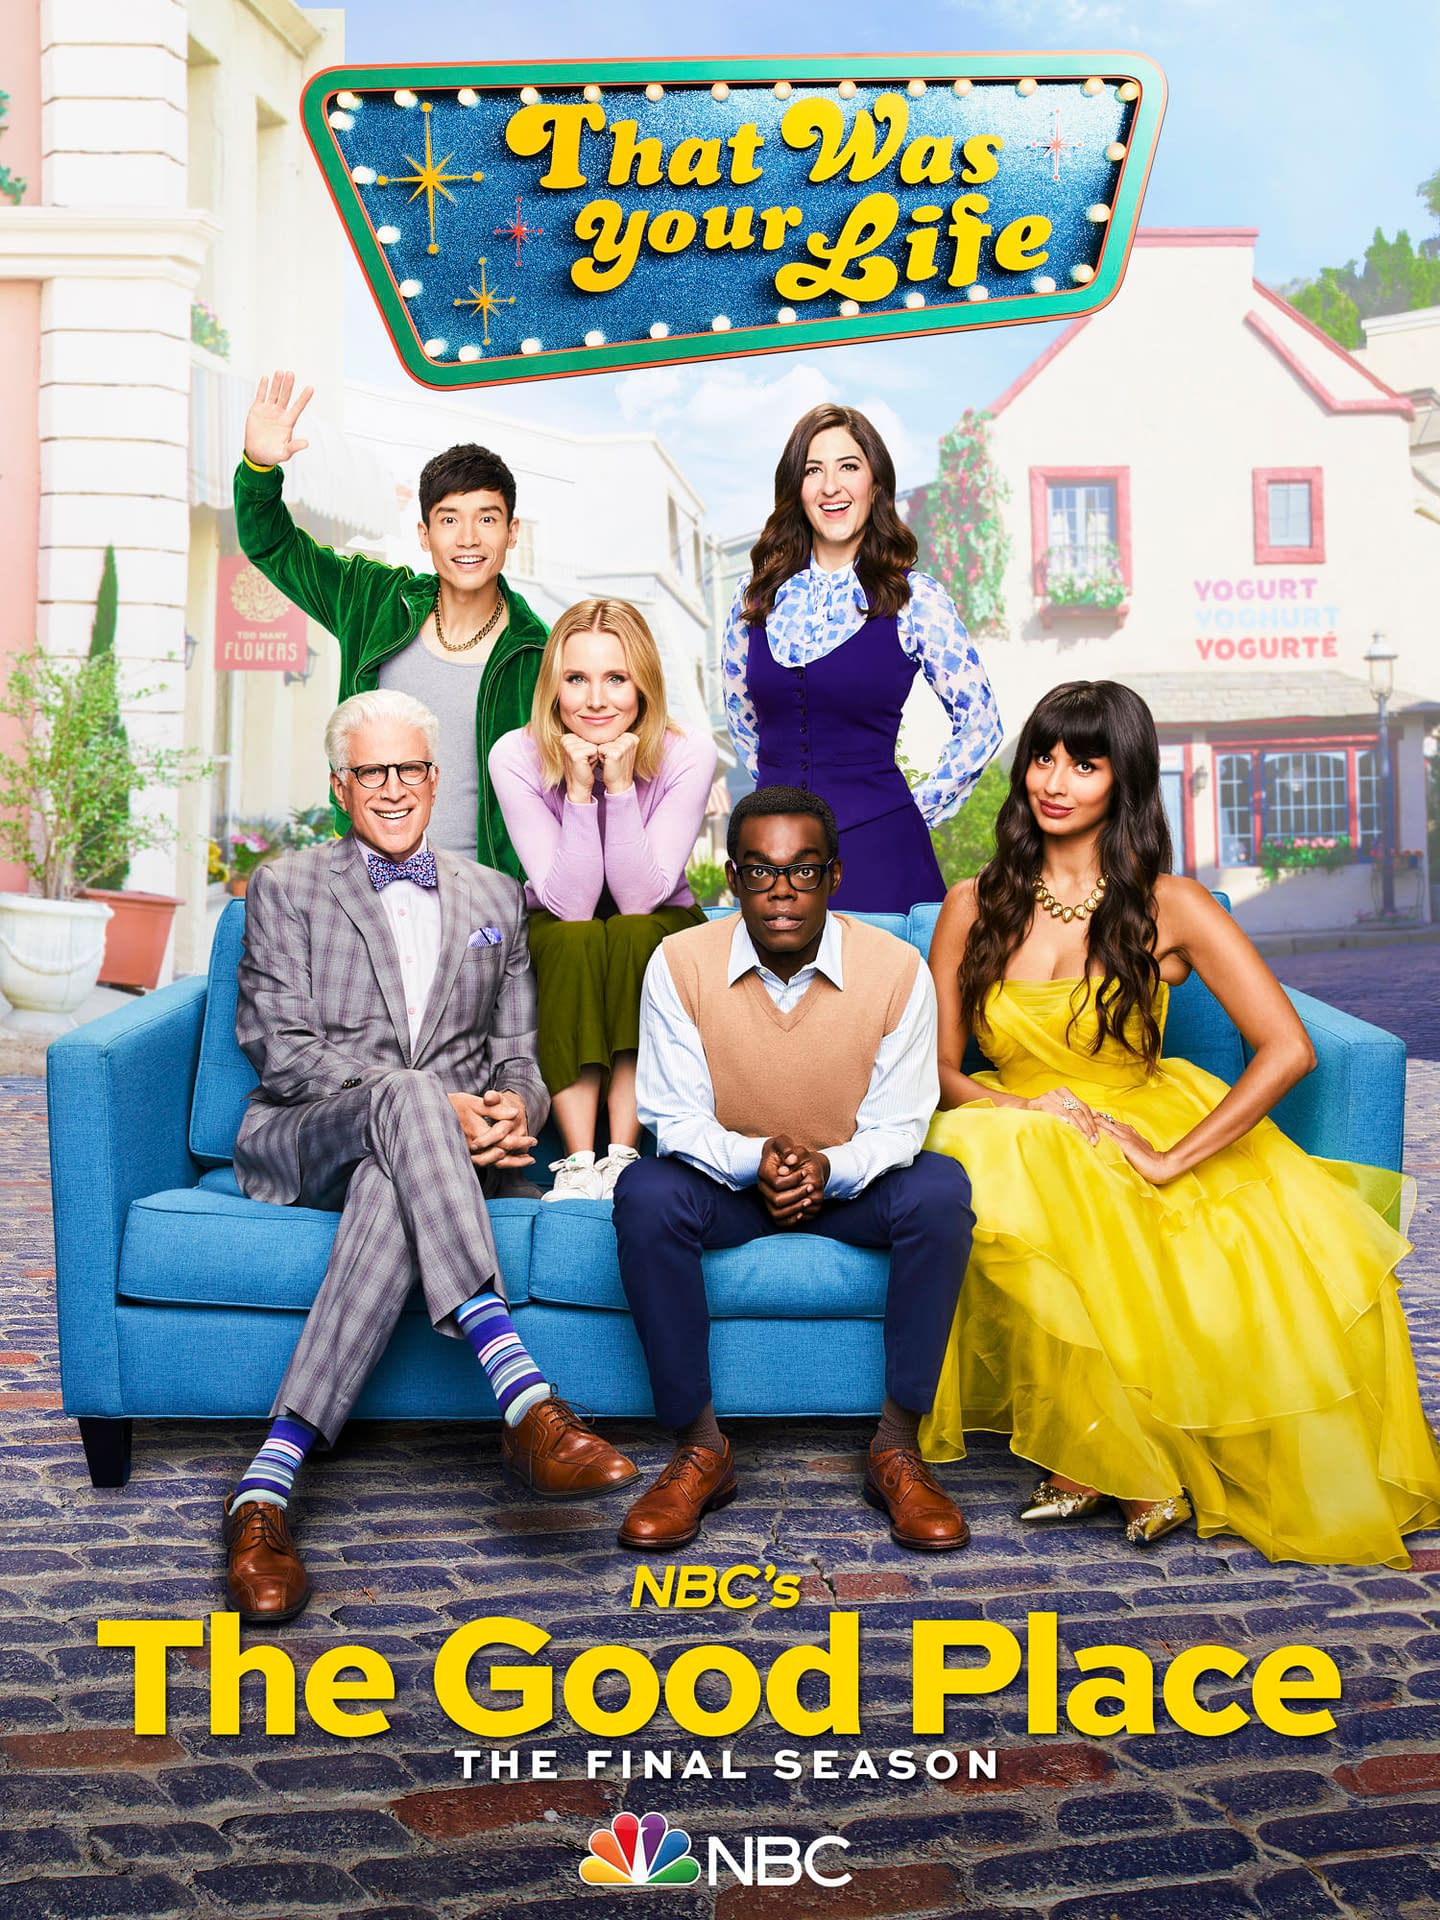 "The Good Place" Season 4: "Disco Janet" and the Secret to Stonehenge Would Impress Us, Linda [SNEAK PREVIEW]